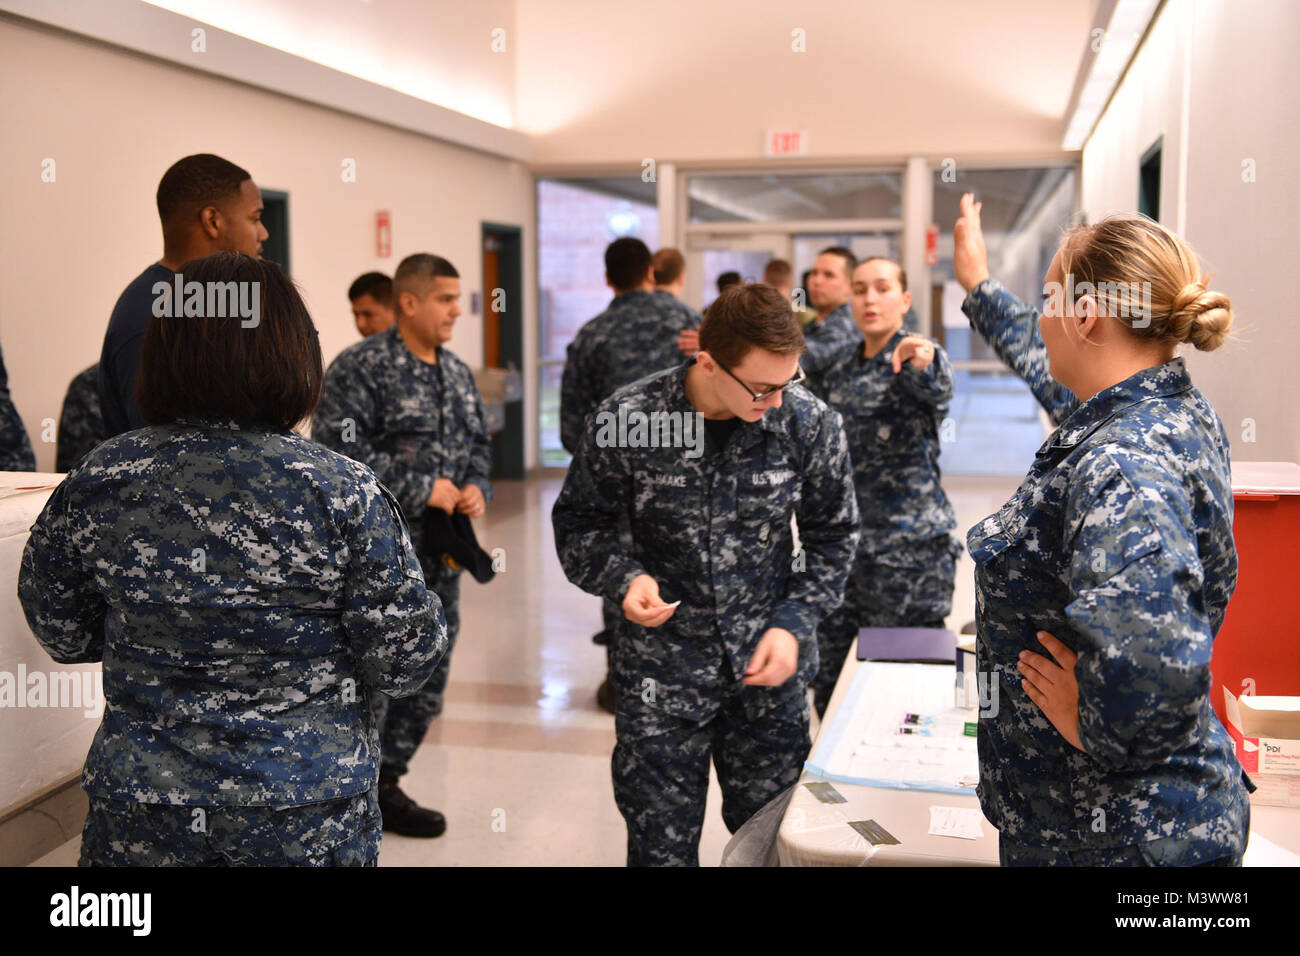 20171101-N-JT254-018 SILVERDALE, Wash. (November 01, 2017) Hospital Corpsman assigned to Naval Hospital Bremerton, direct Sailors to flu vaccine stations.  The influenza, or “flu”, has the potential to adversely impact Navy force readiness and mission execution, and vaccination is mandatory for DoD uniformed personnel. (U.S. Navy photo by Mass Communication Specialist Seaman Christopher Jahnke) 171101-N-JT254-018 by Naval Base Kitsap (NBK) Stock Photo